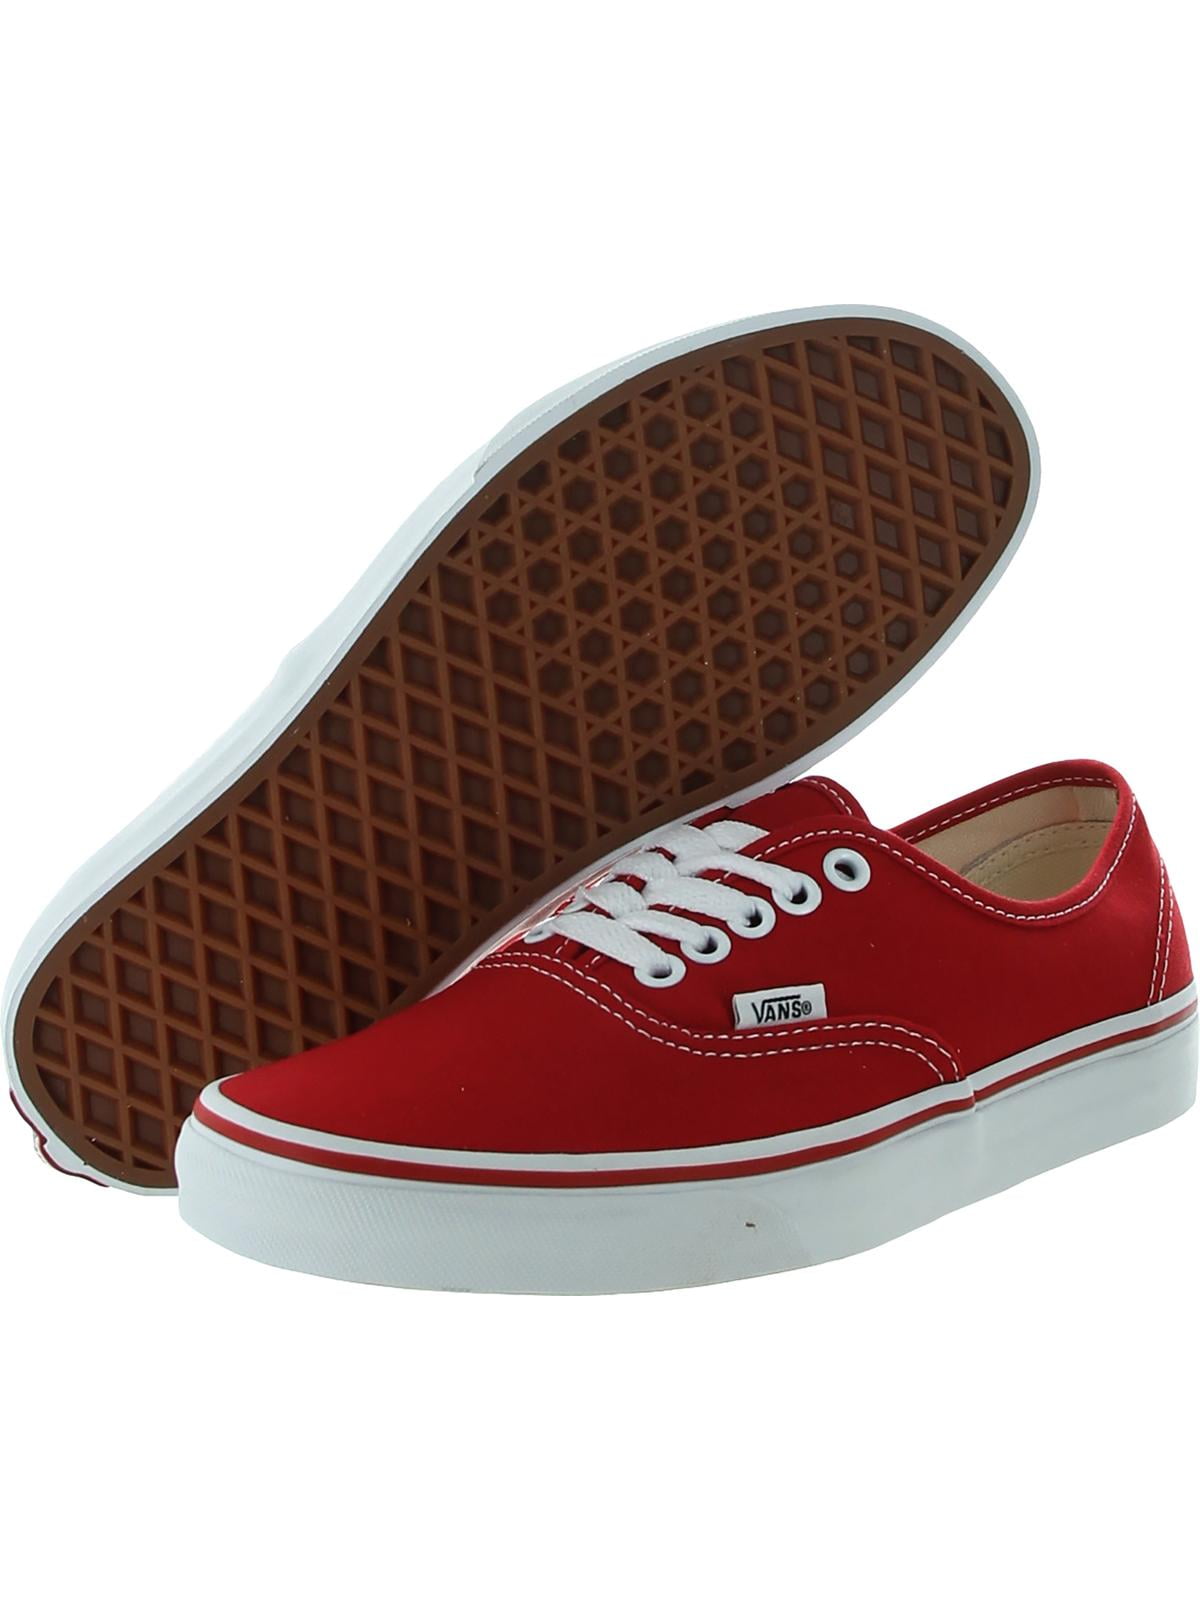 vans shoes for boys red